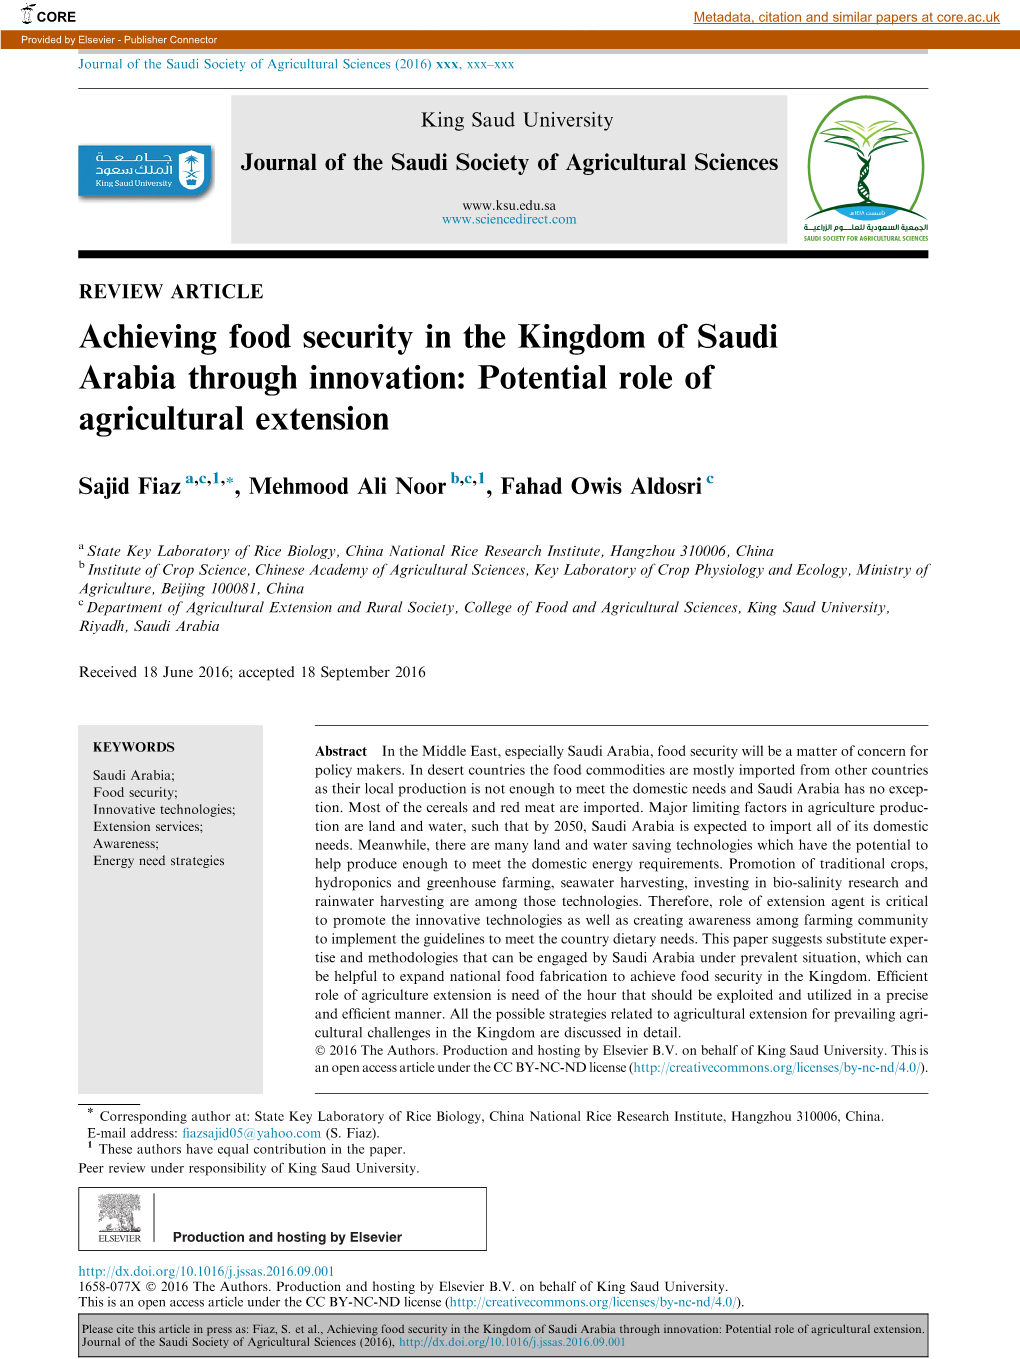 Achieving Food Security in the Kingdom of Saudi Arabia Through Innovation: Potential Role of Agricultural Extension